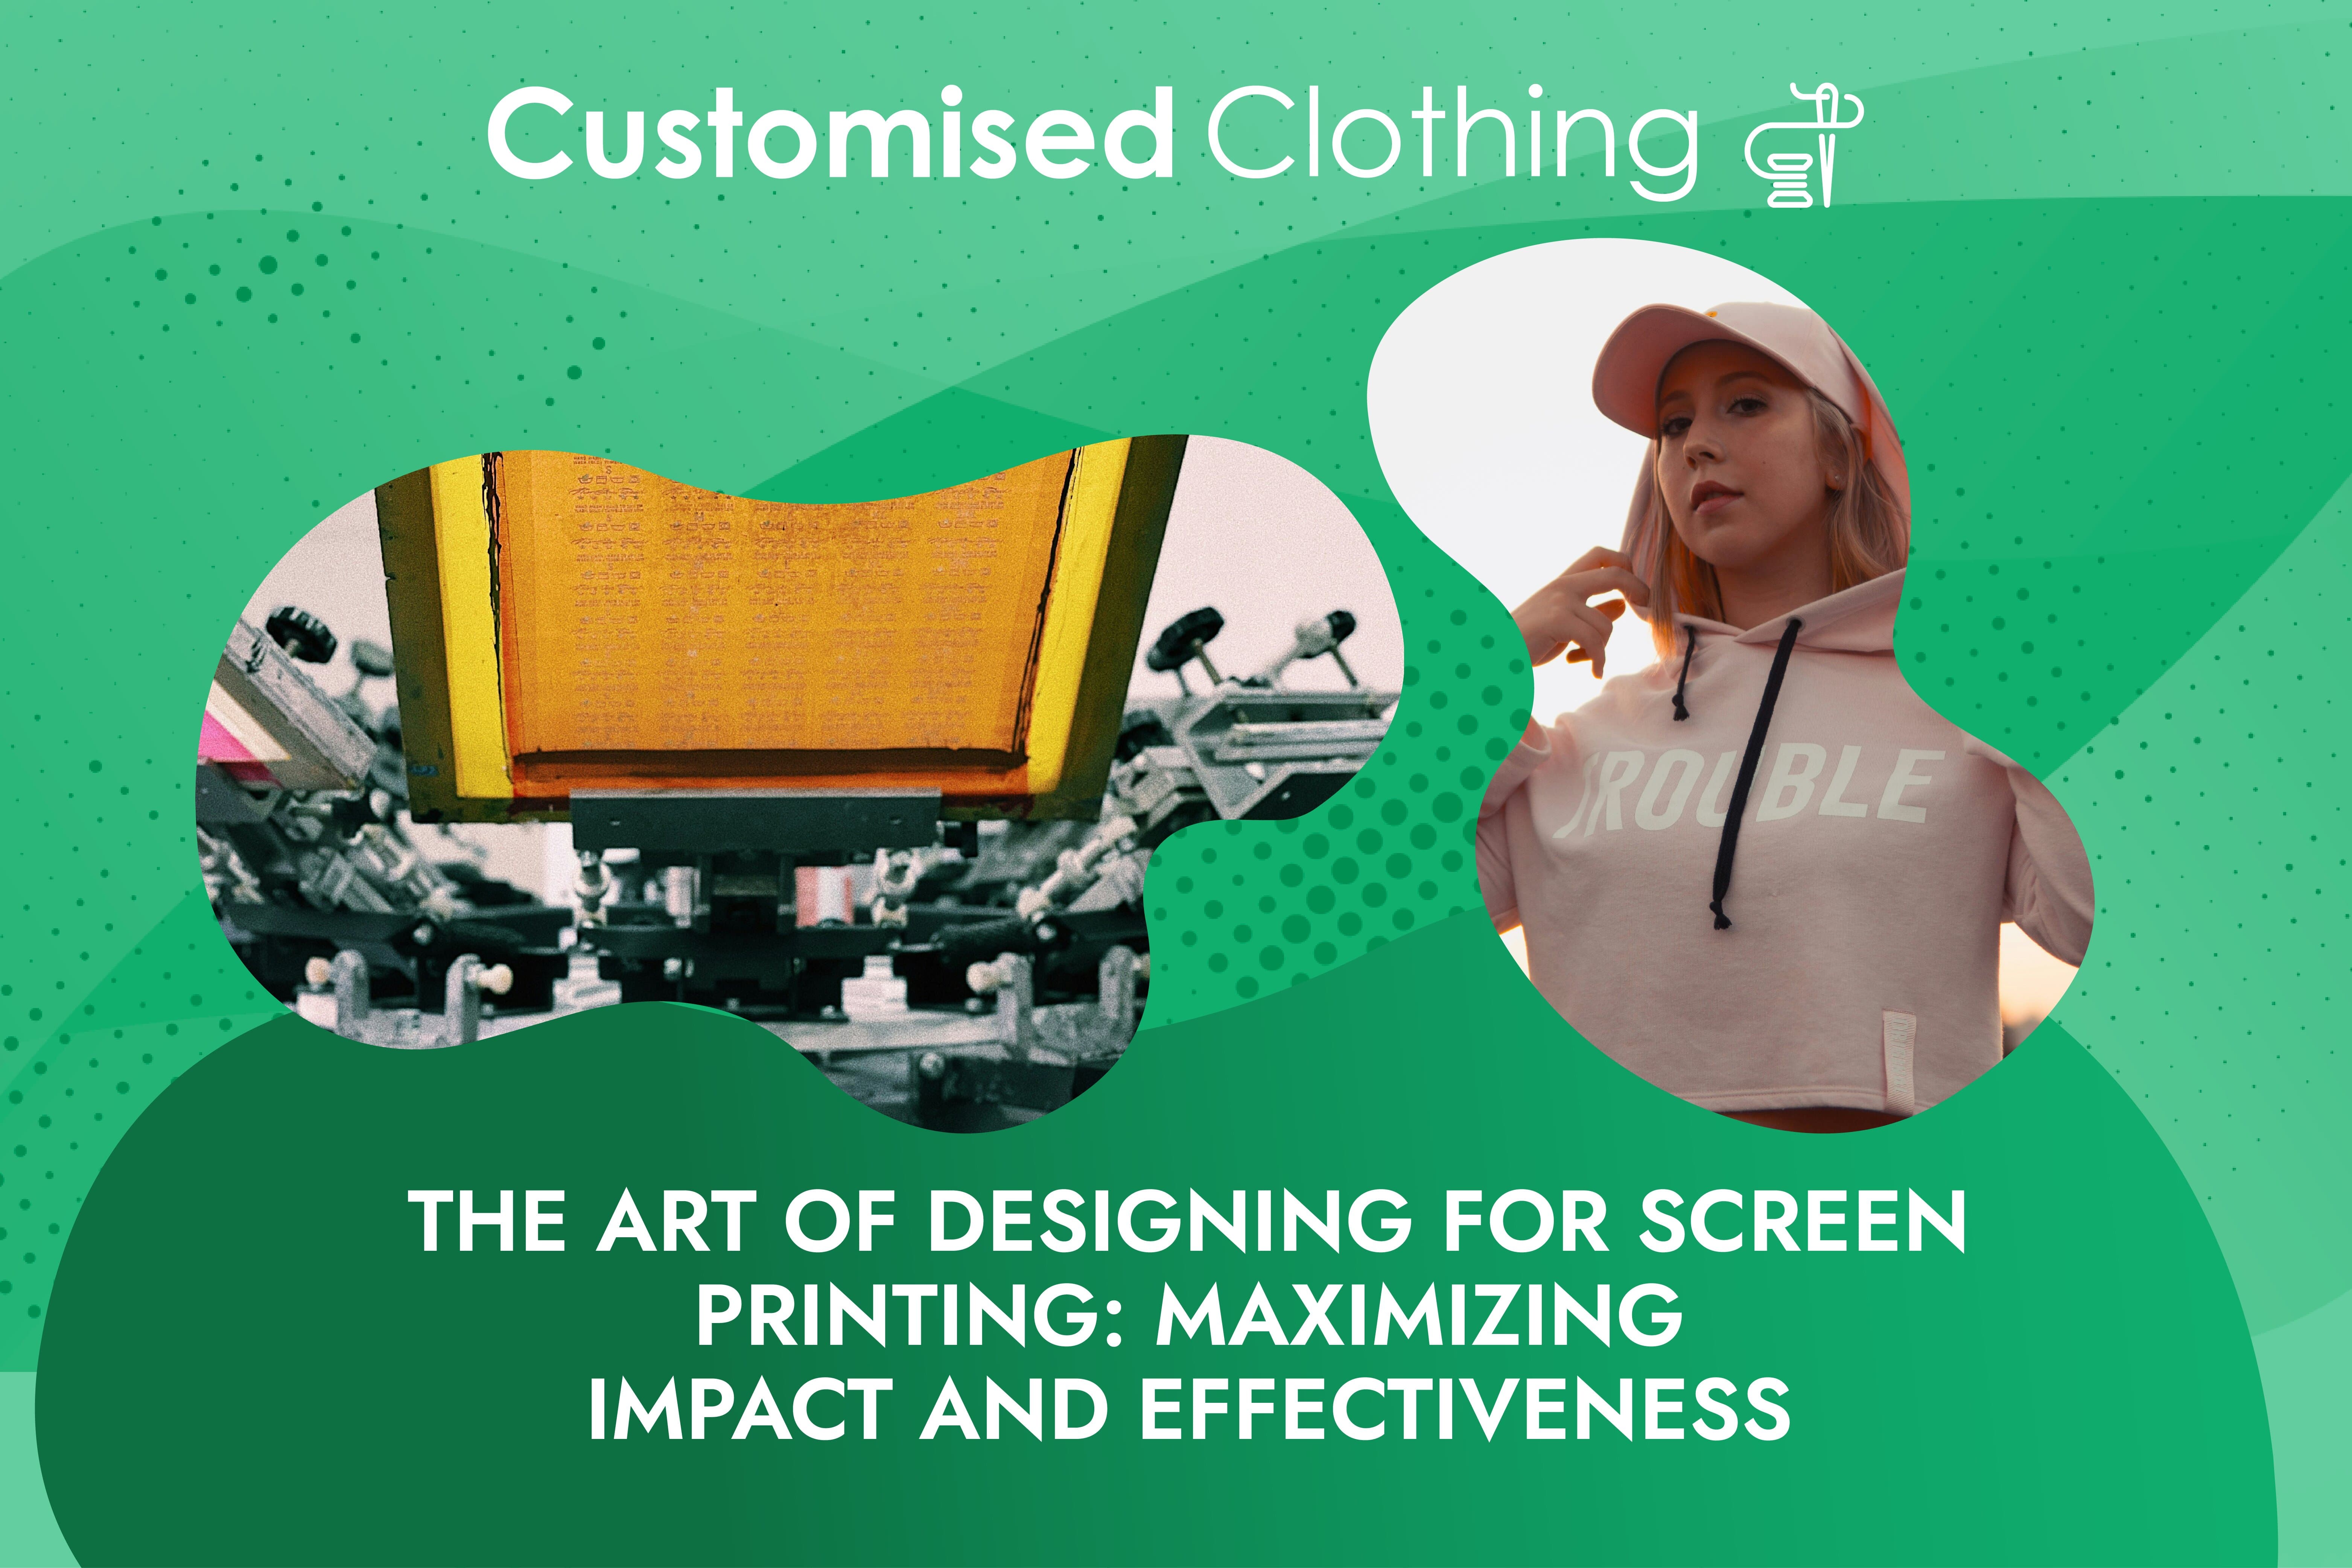 The Art of Designing for Screen Printing: Maximising Impact & Effectiveness